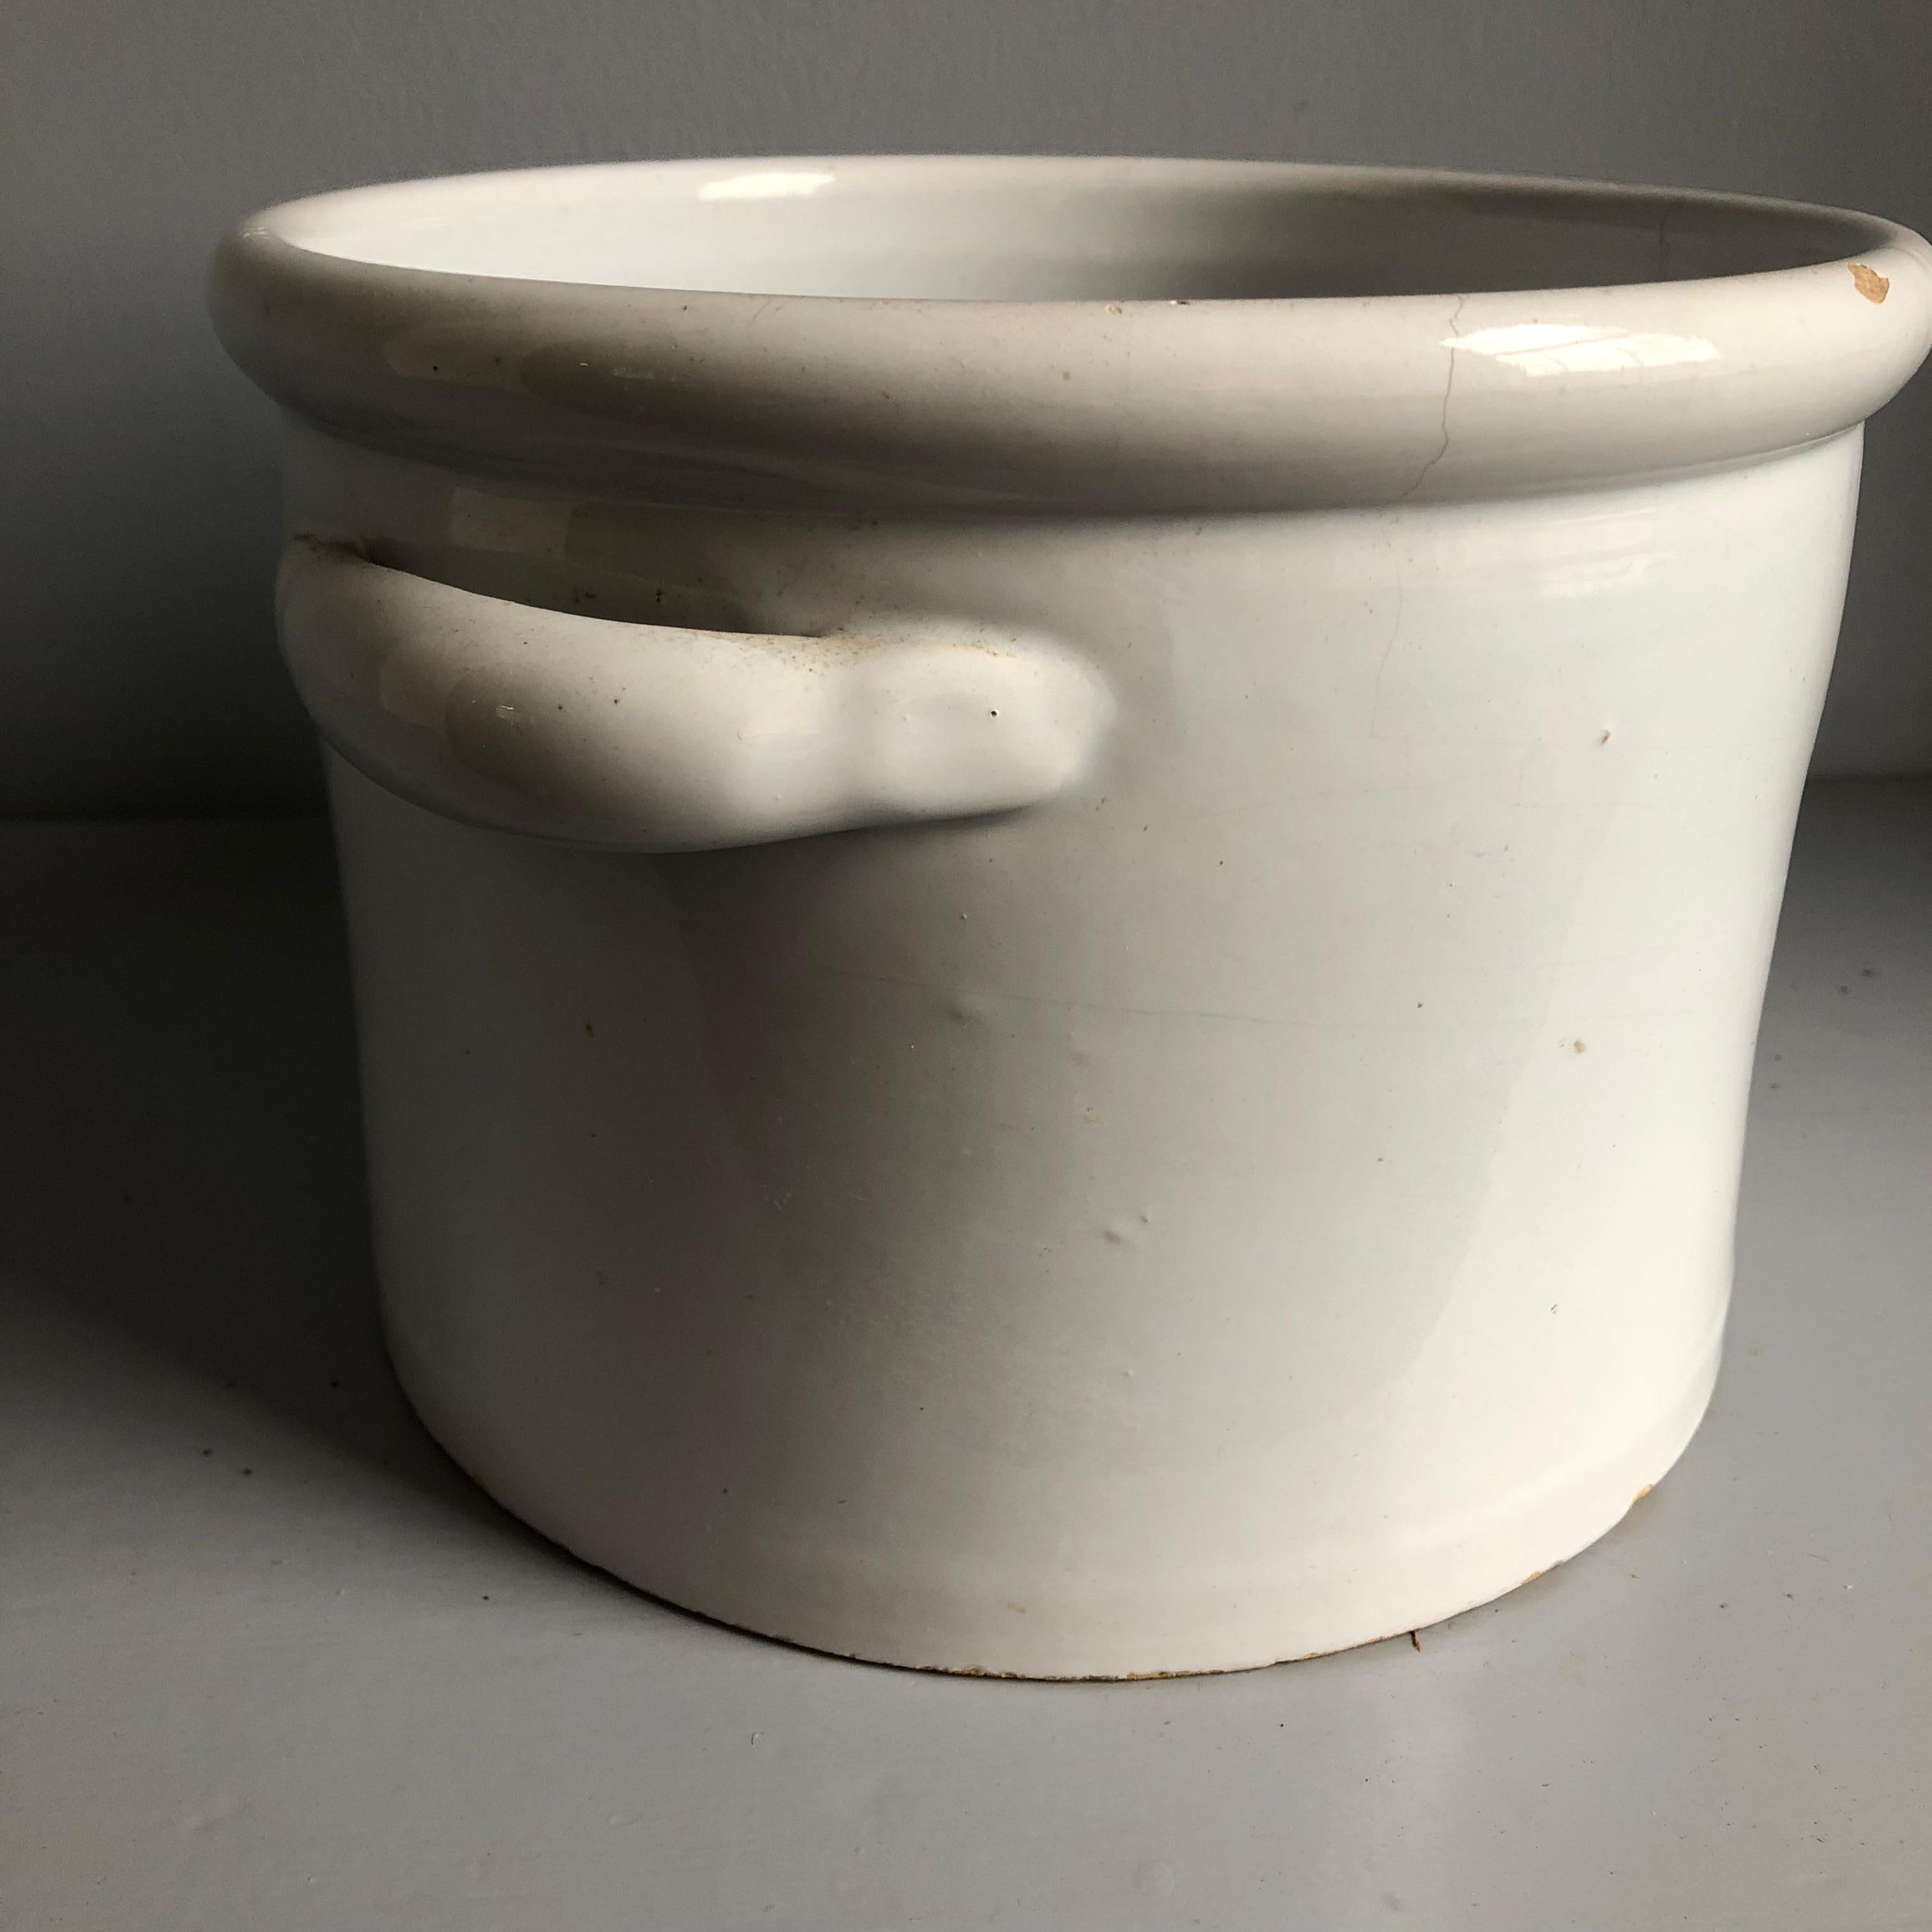 A white glazed French Faience “Cache Pot” with handles, circa 1870.